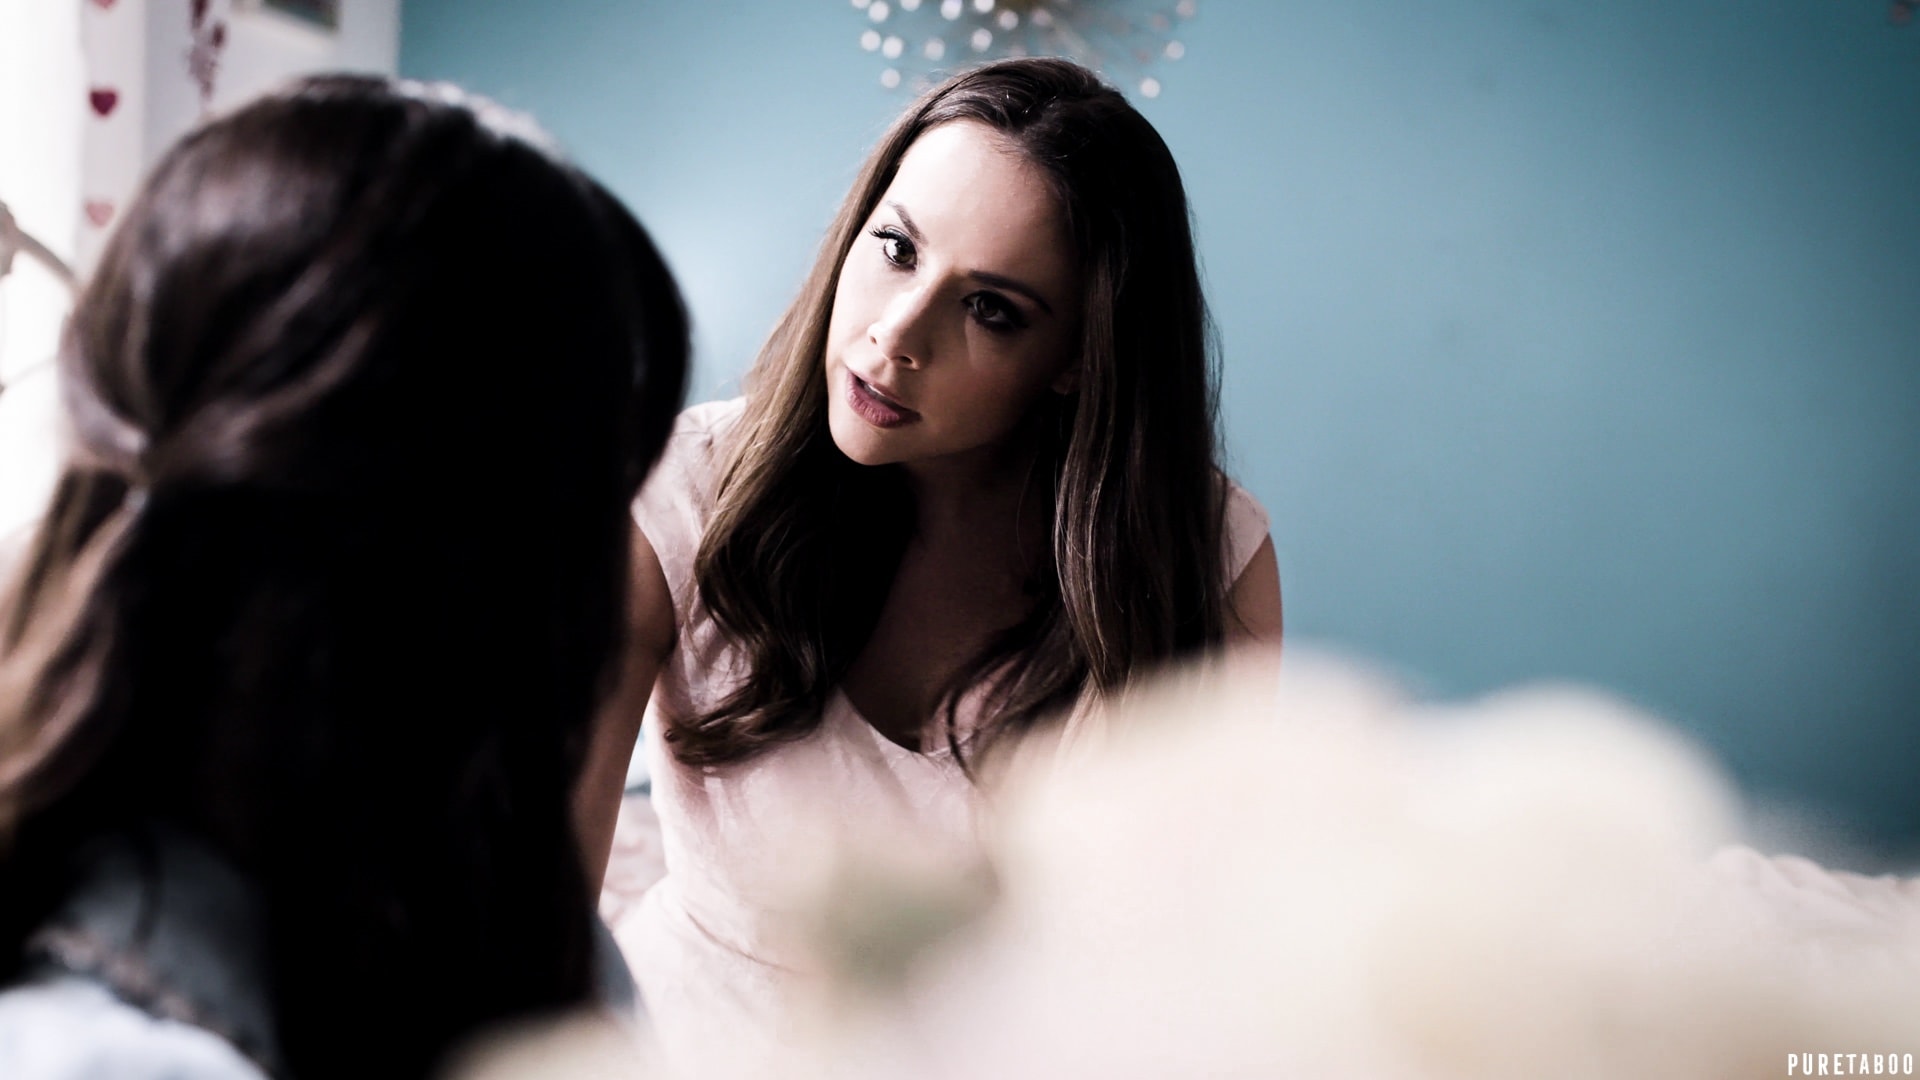 Pure Taboo 'A Daughter's Love: An Alison Rey Story' starring Alison Rey (Photo 2)